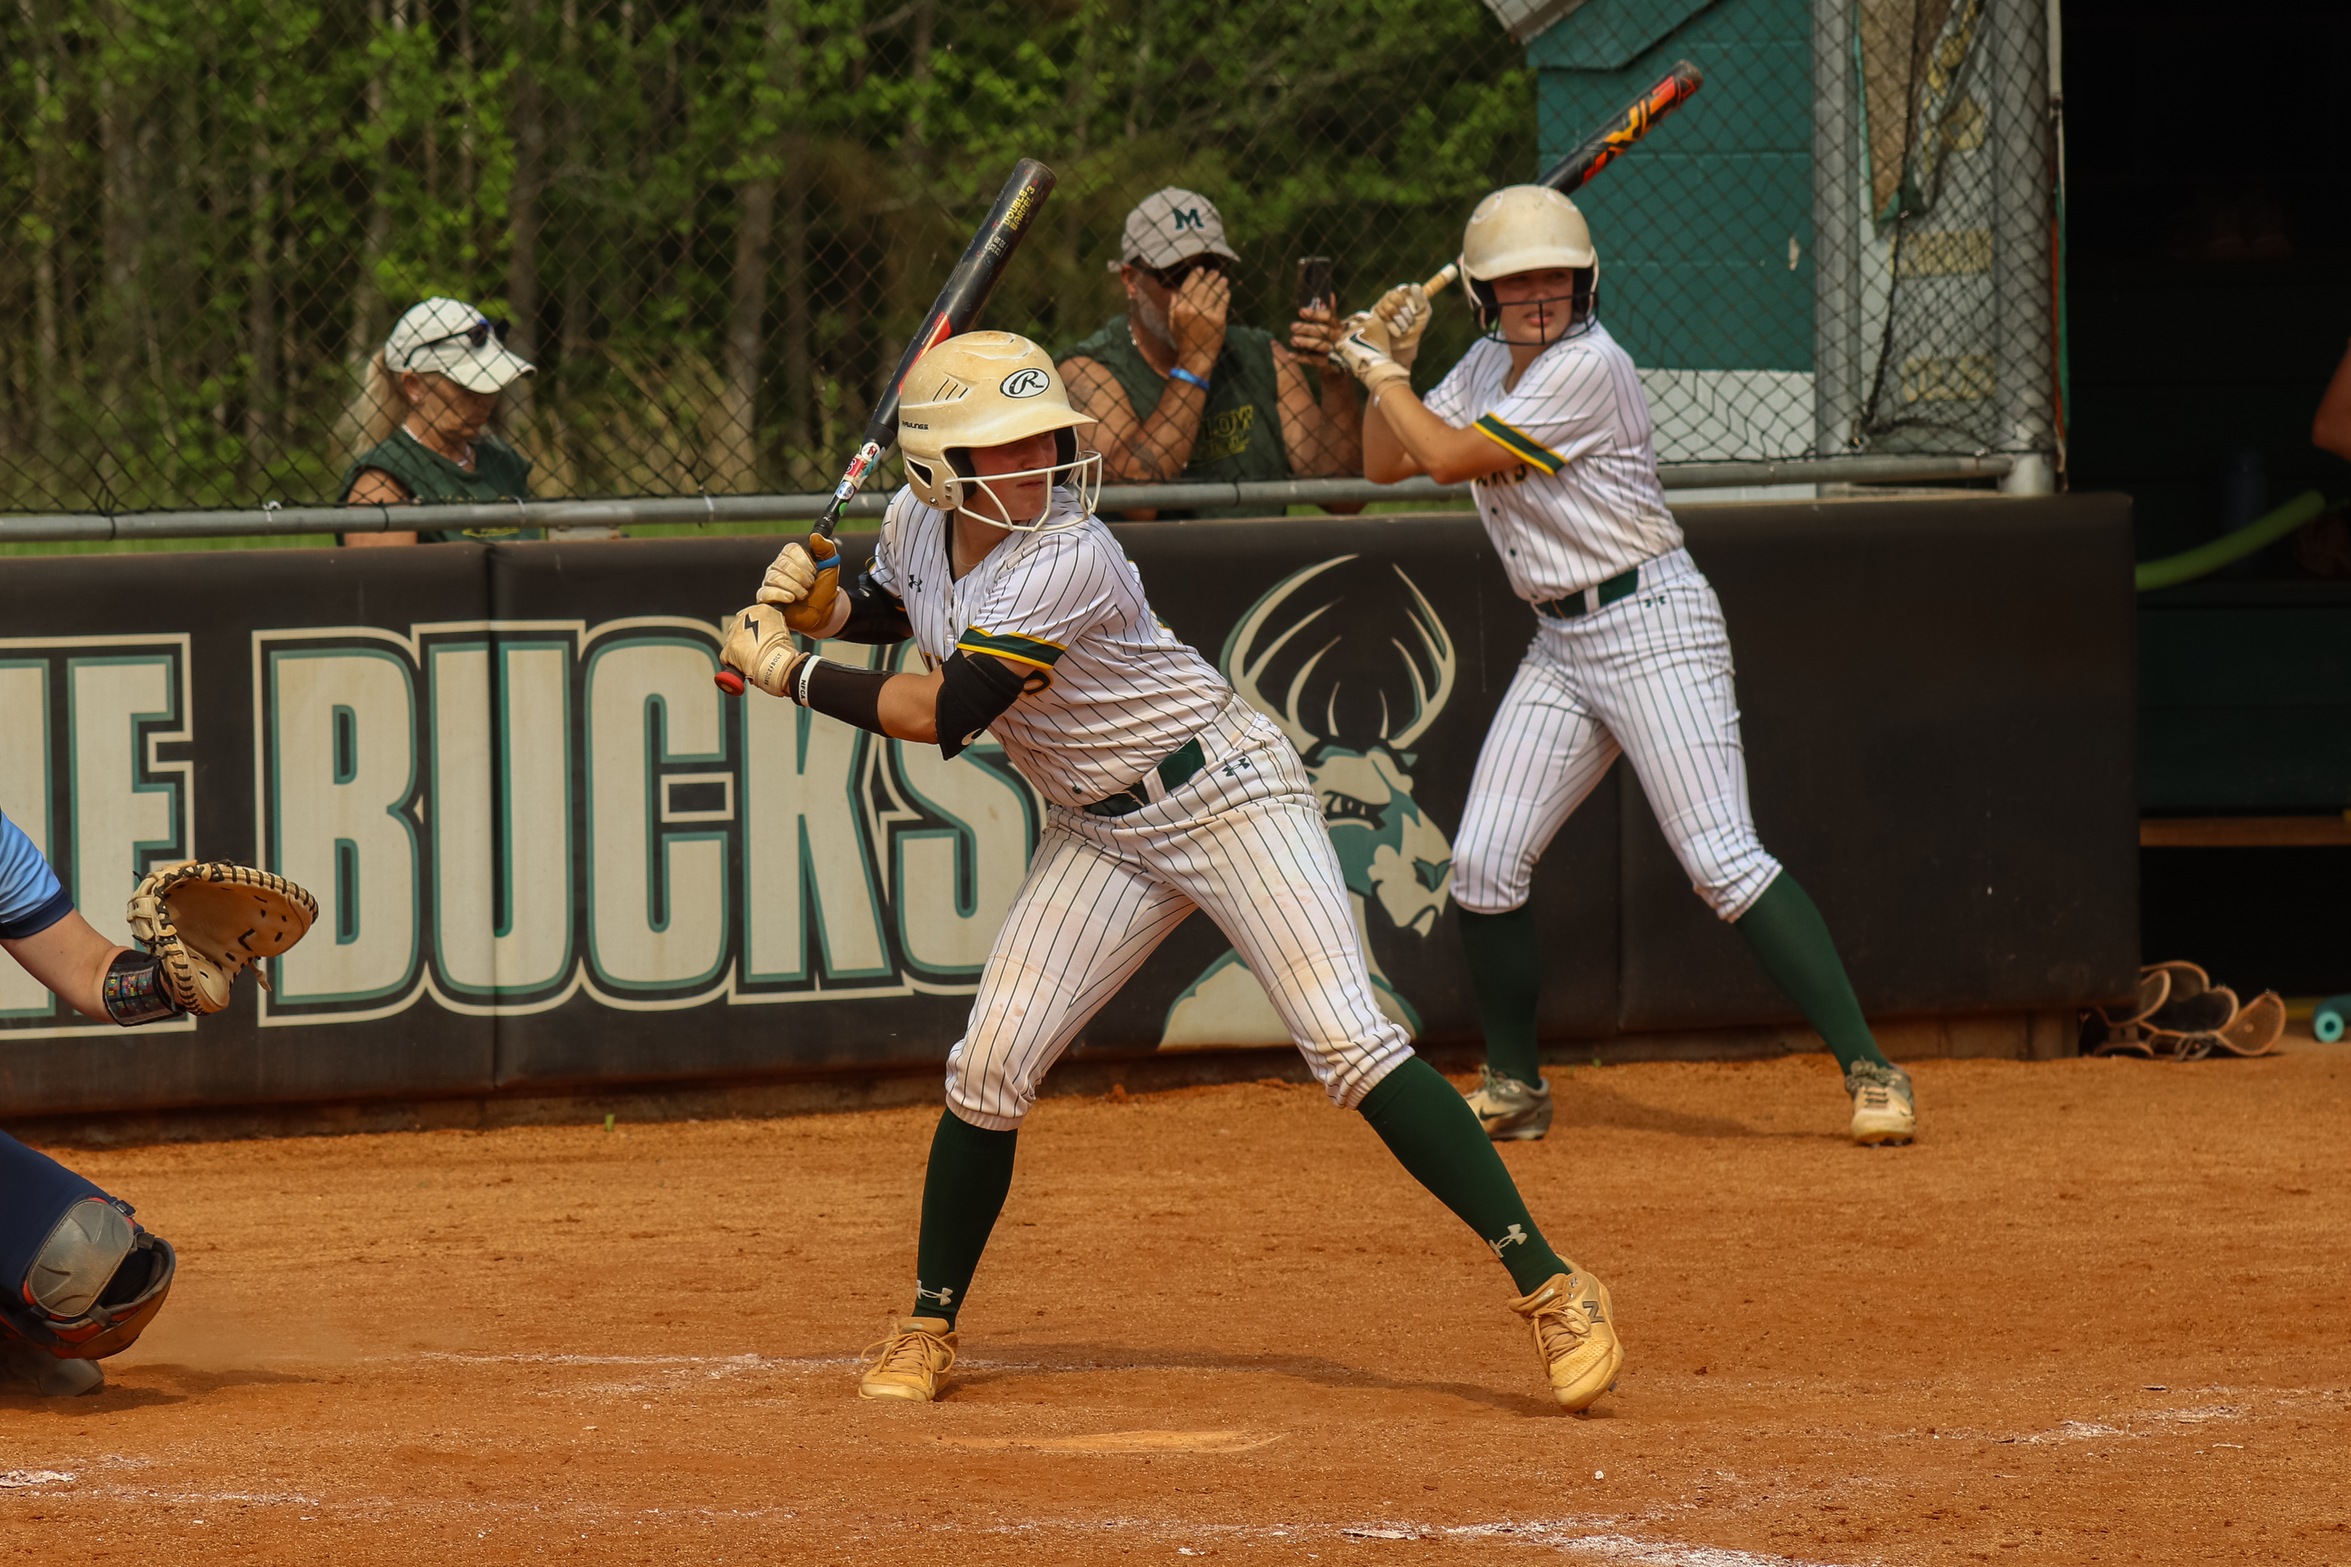 Motlow Softball&rsquo;s Season Ends With Loss To Walters State